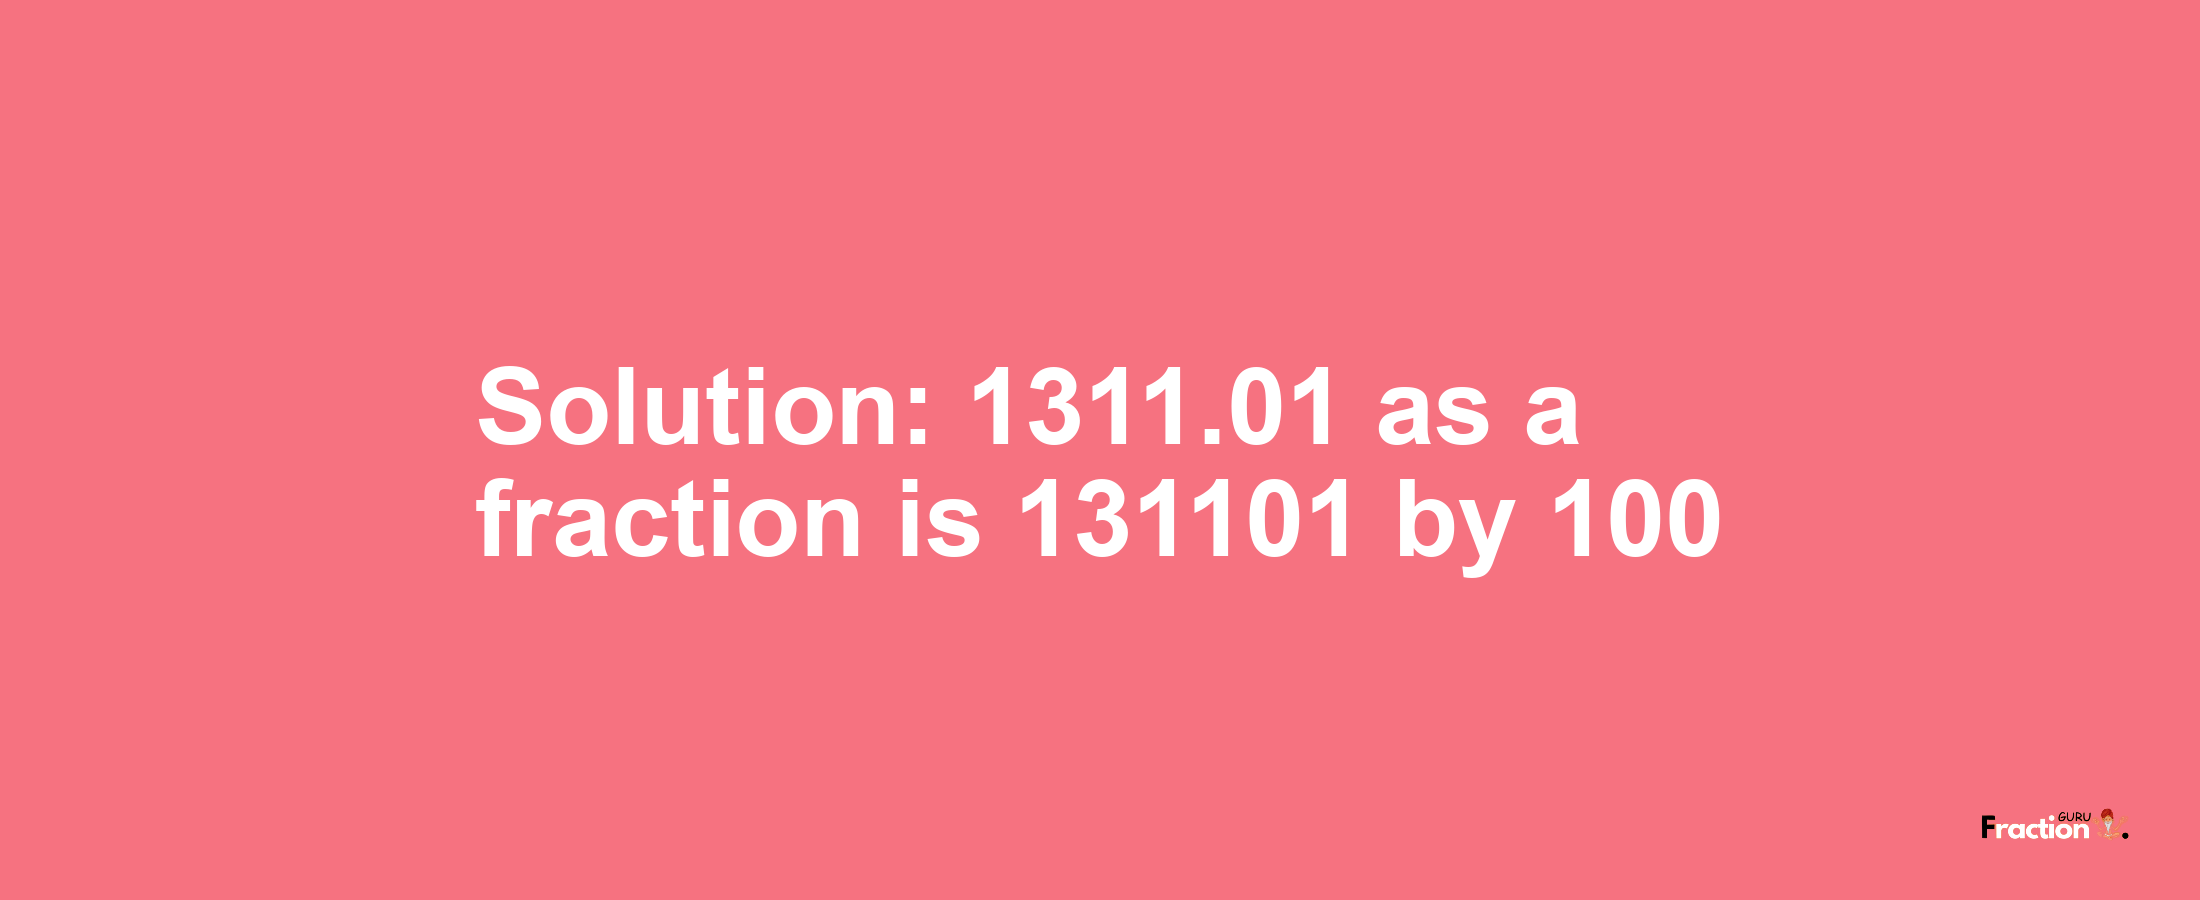 Solution:1311.01 as a fraction is 131101/100